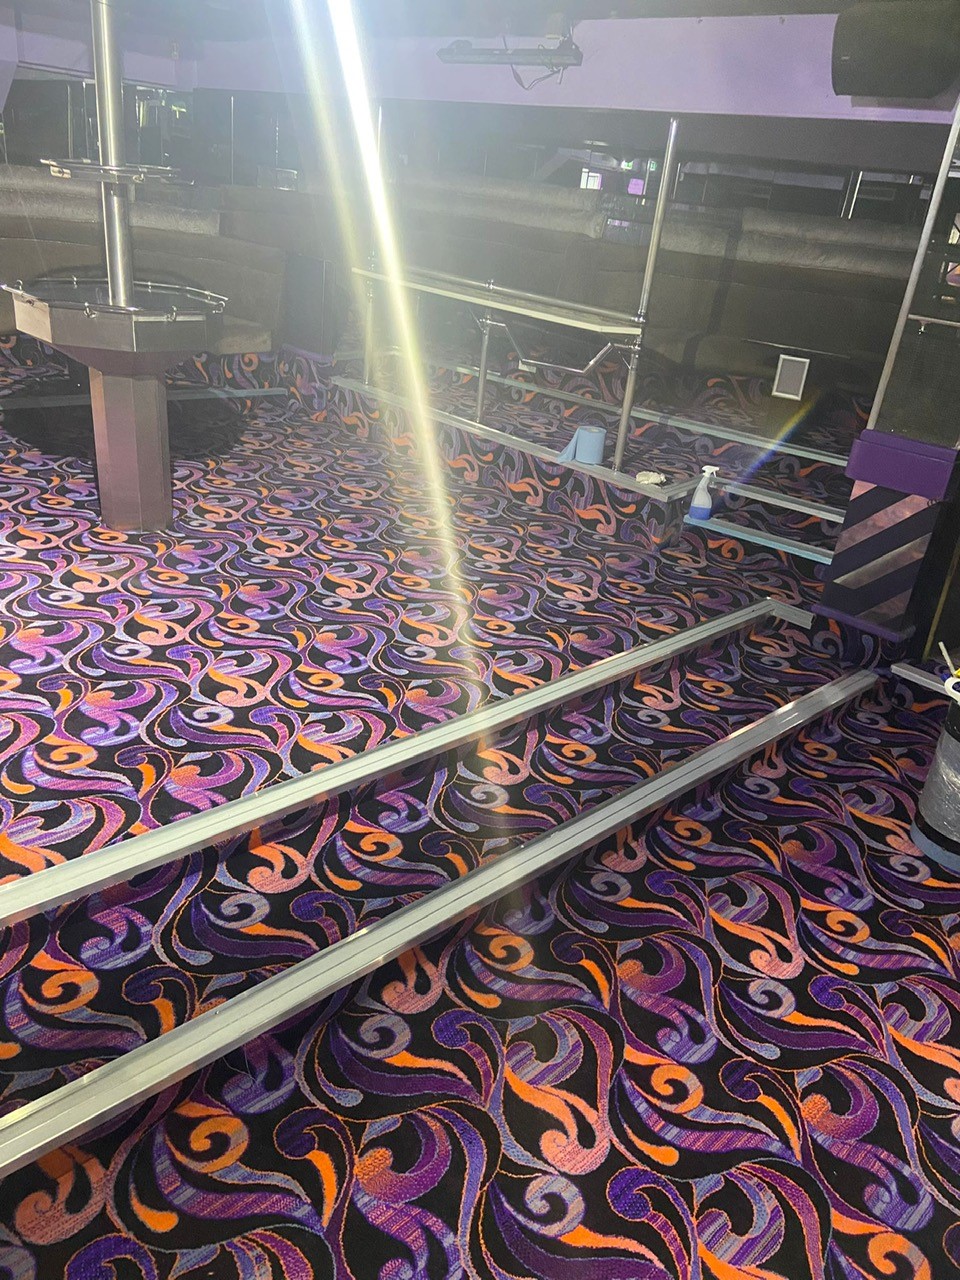 Acapulco Nightclub Halifax steps with bespoke purple and black patterned carpets designed by Wilton Carpets